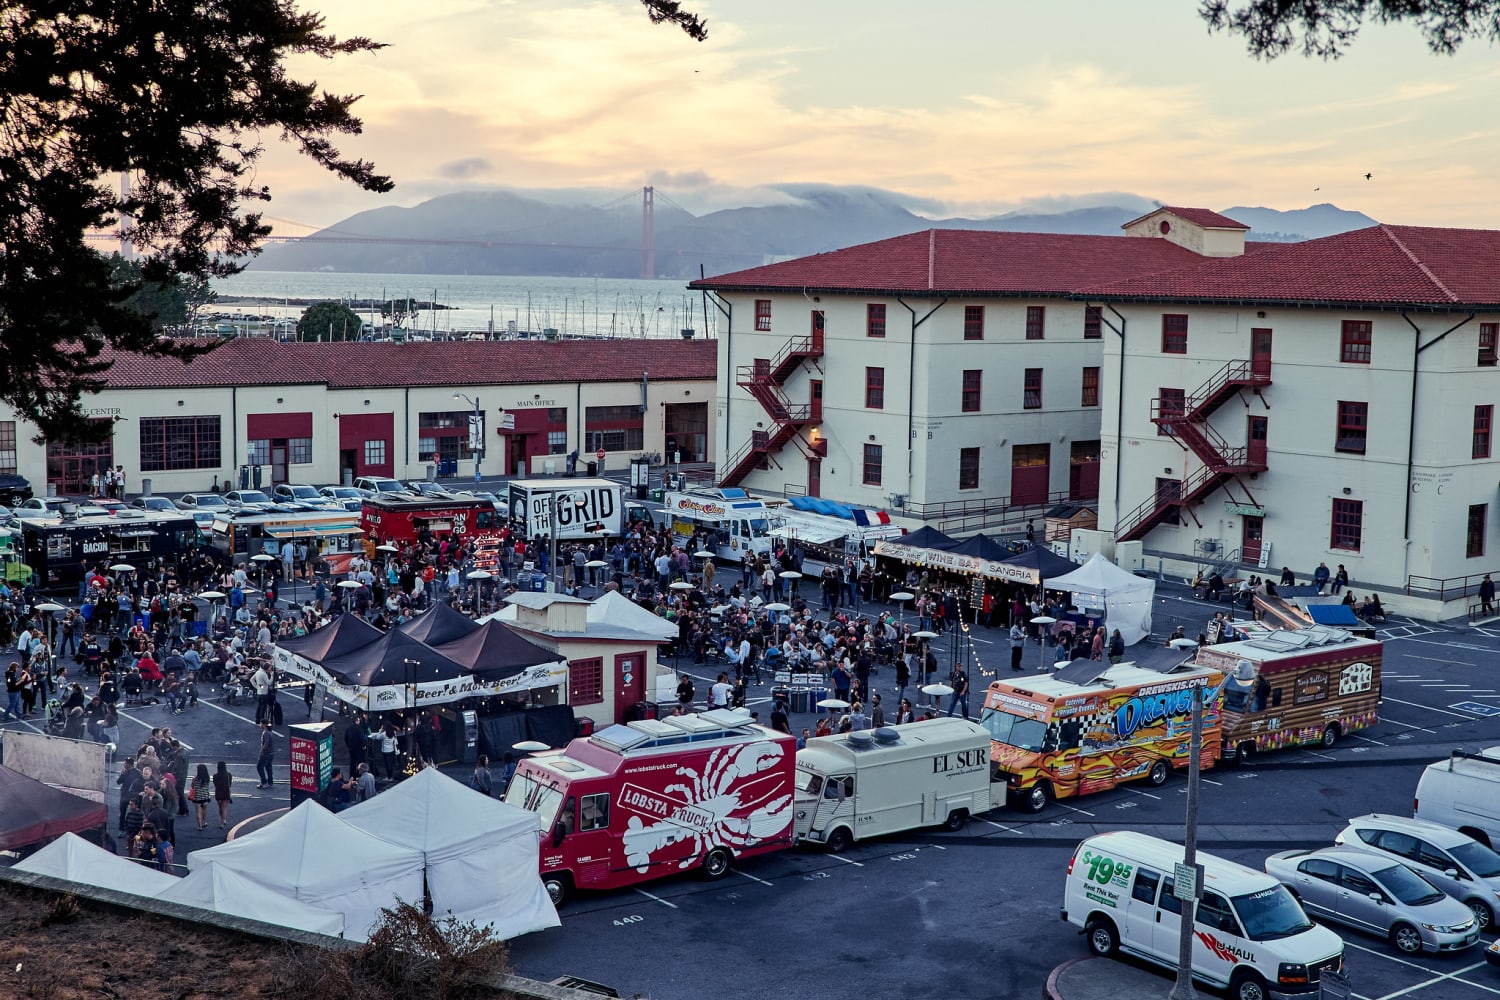 Off the Grid downscales with new project at Fort Mason